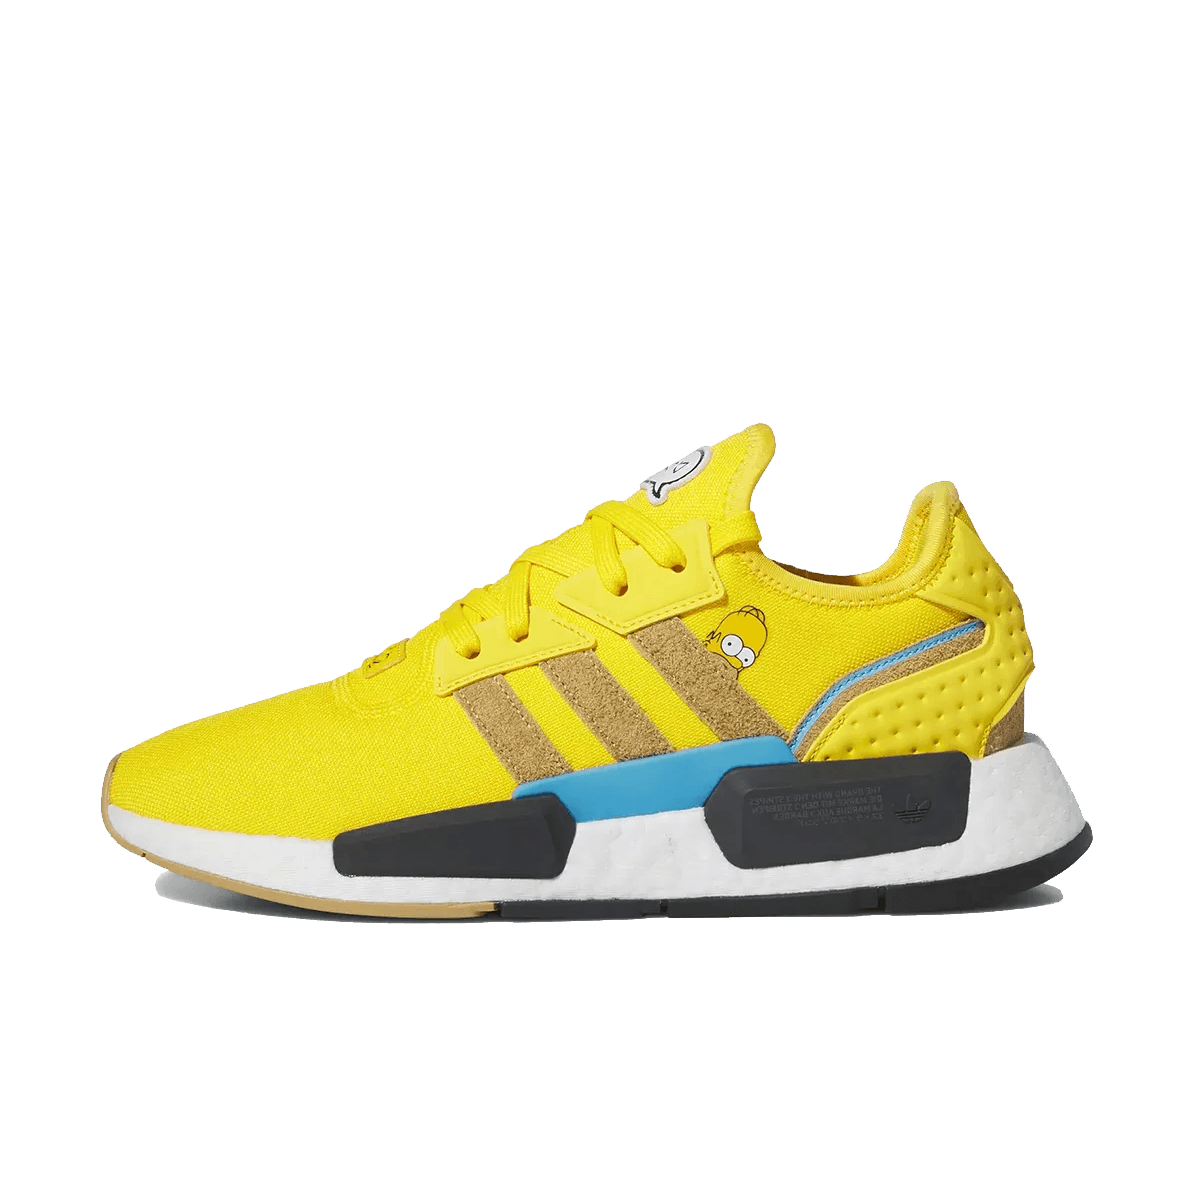 The Simpsons x adidas NMD G1 Low 'Homer' IE8468